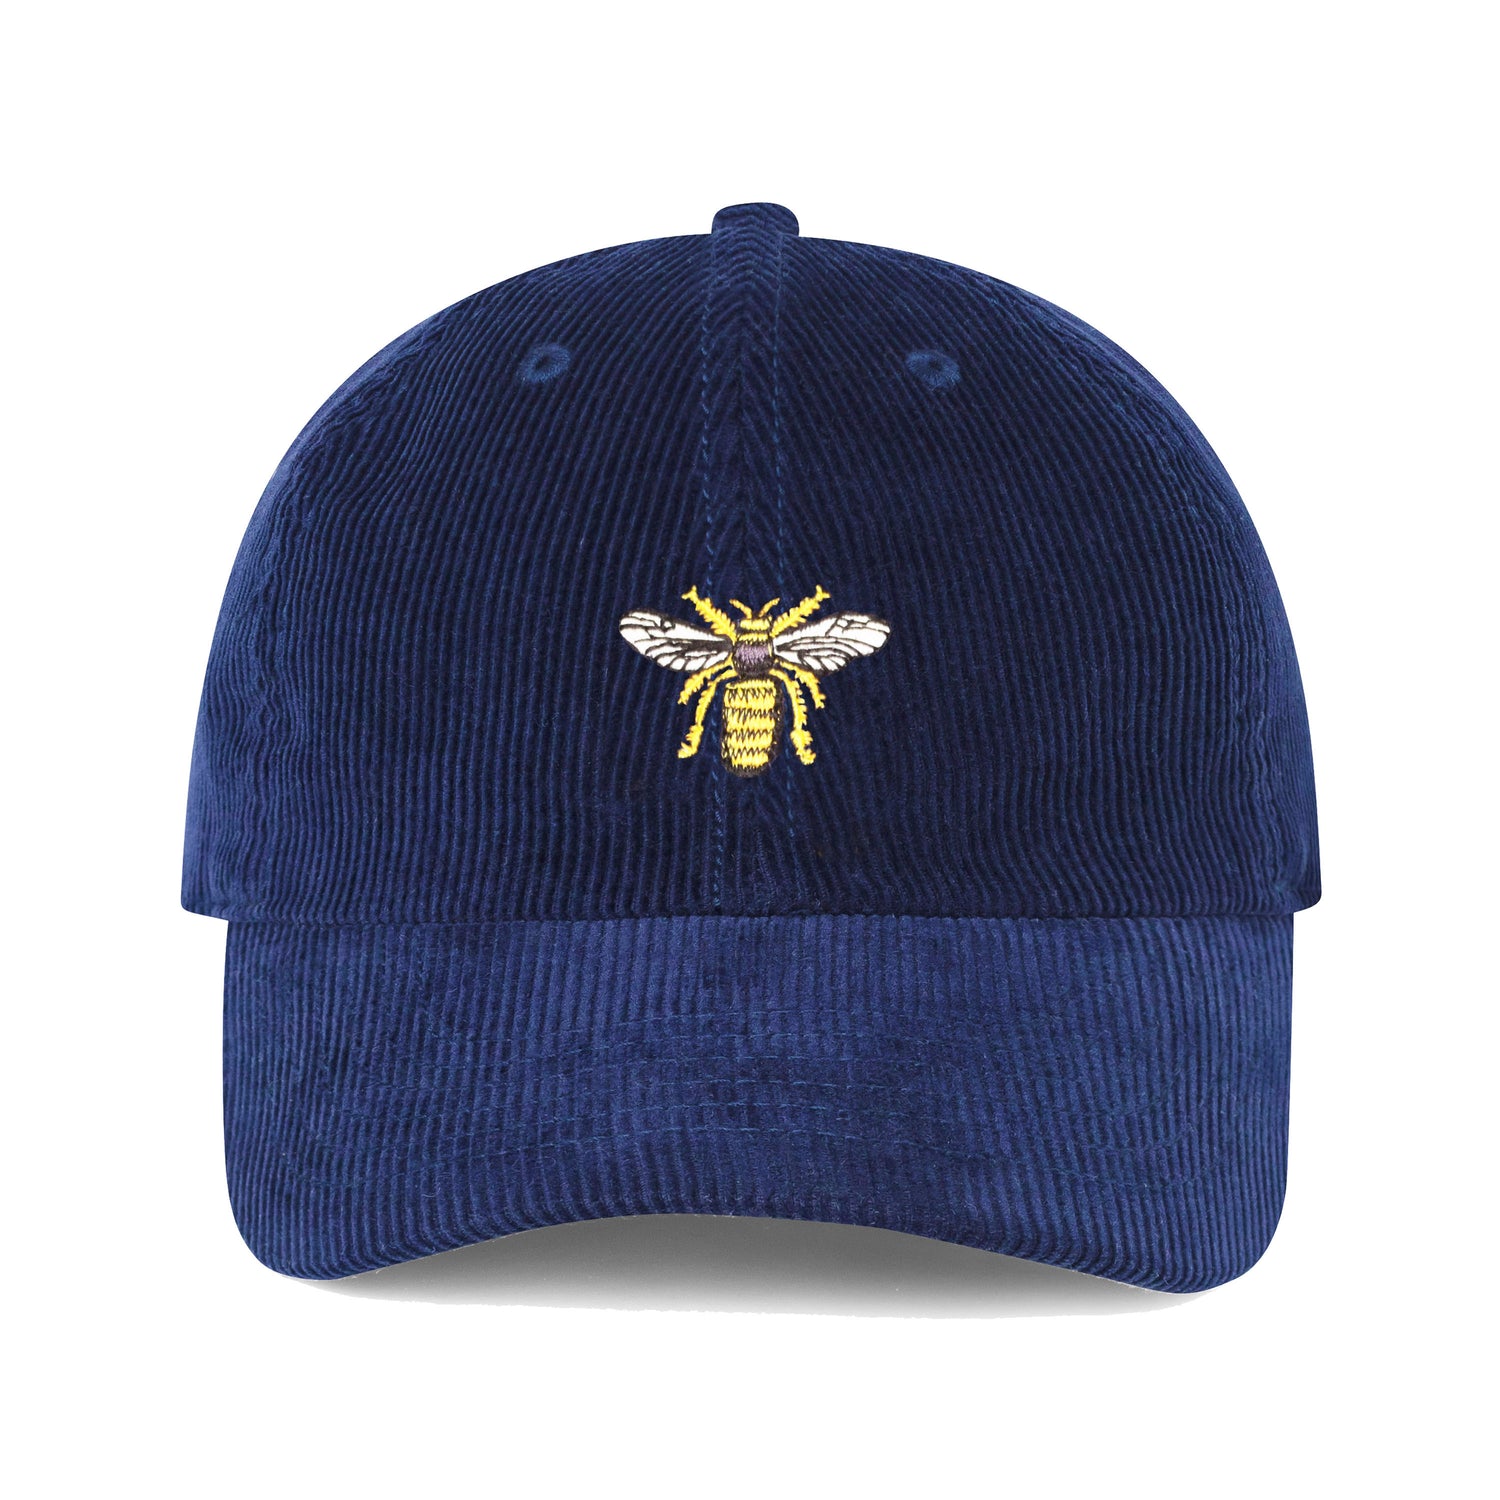 Navy Corduroy hat with satin-stitched drone bee motif.